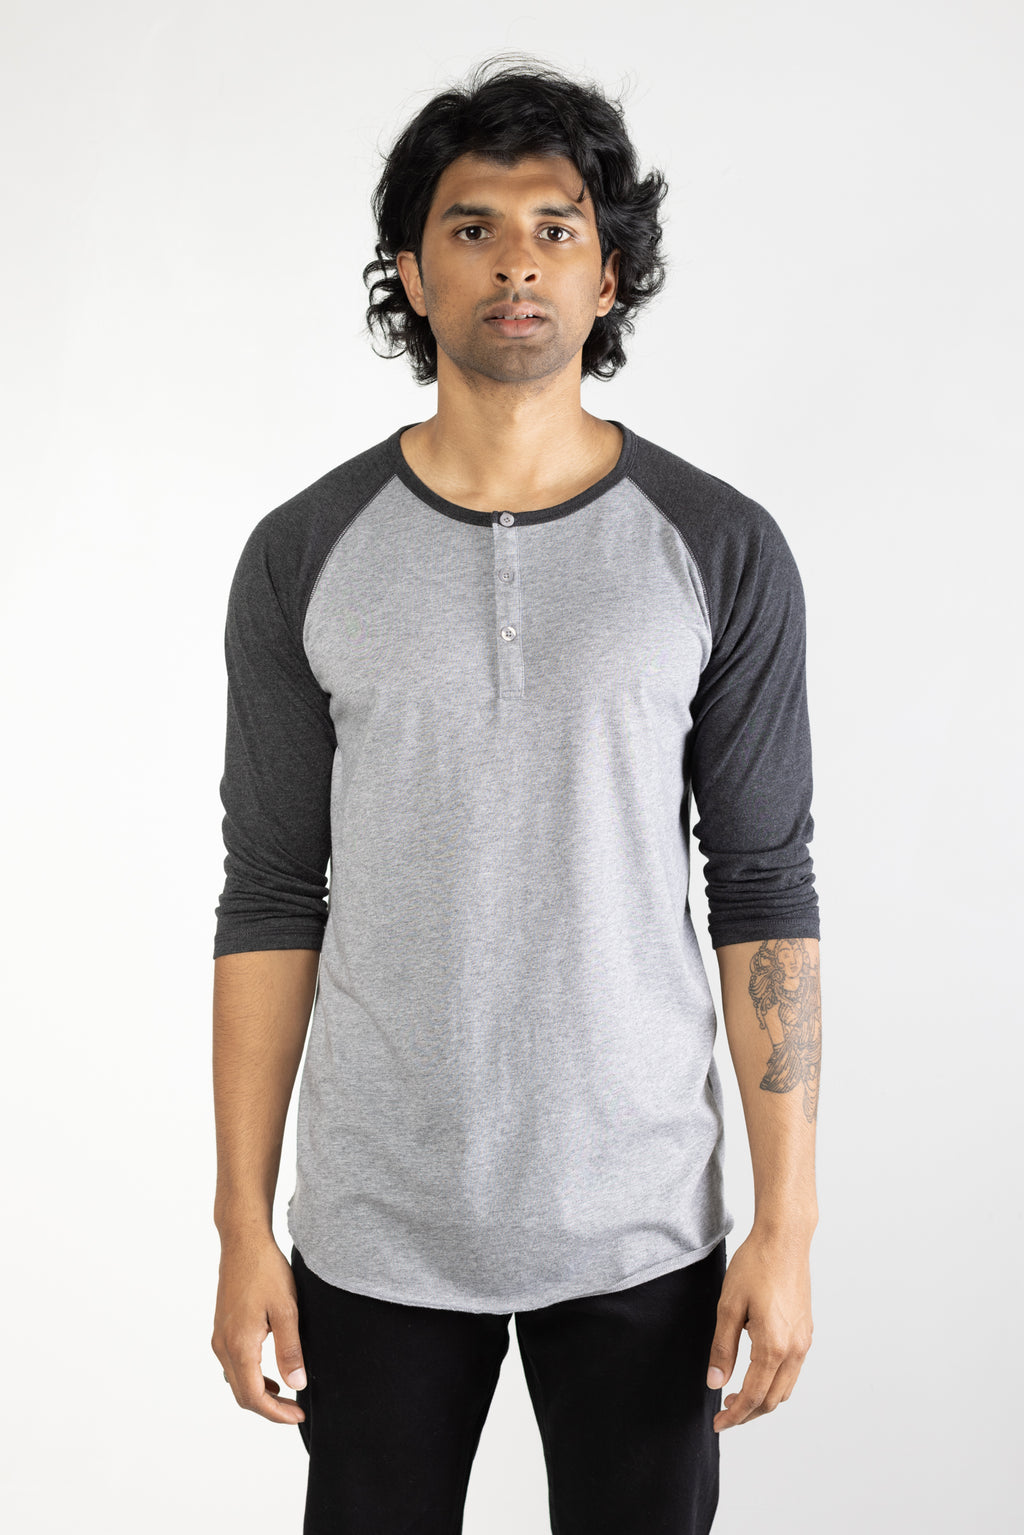 NS2122-9 Tri-blend 3/4 henley in Grey with Charcoal sleeves 02